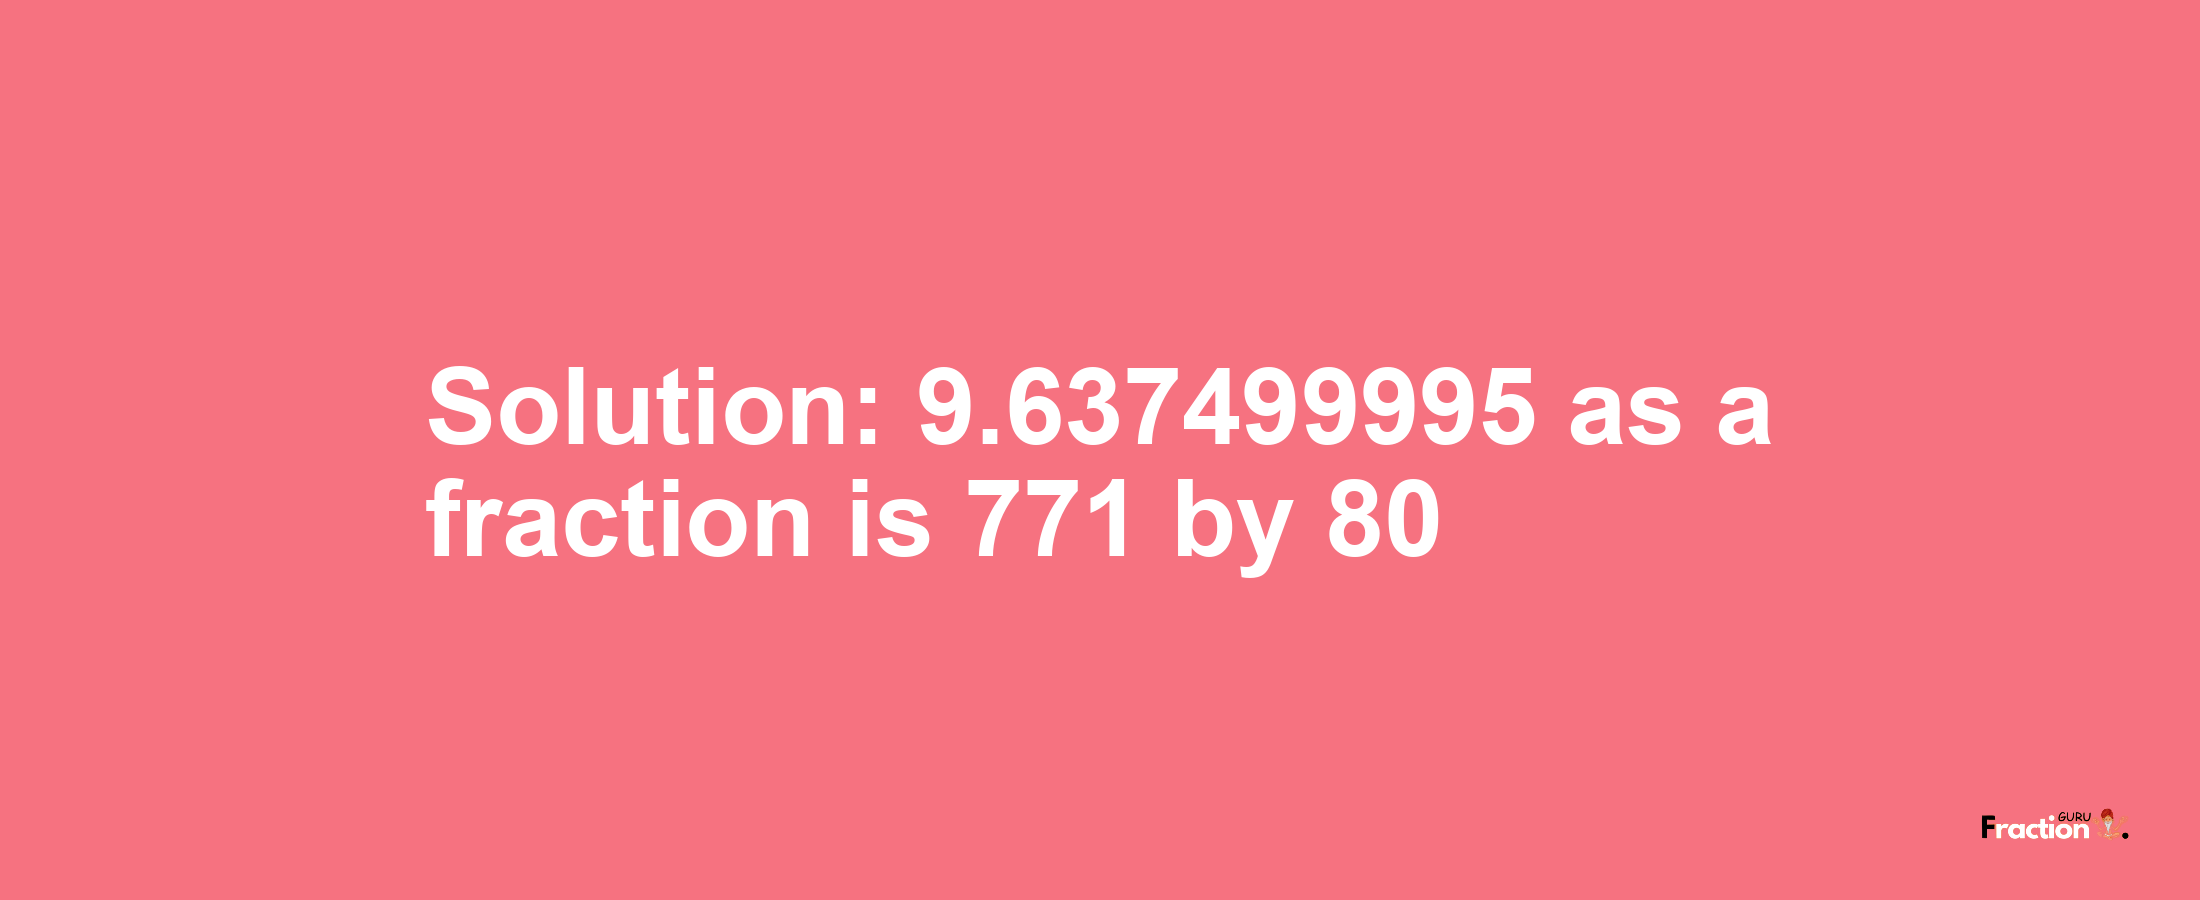 Solution:9.637499995 as a fraction is 771/80